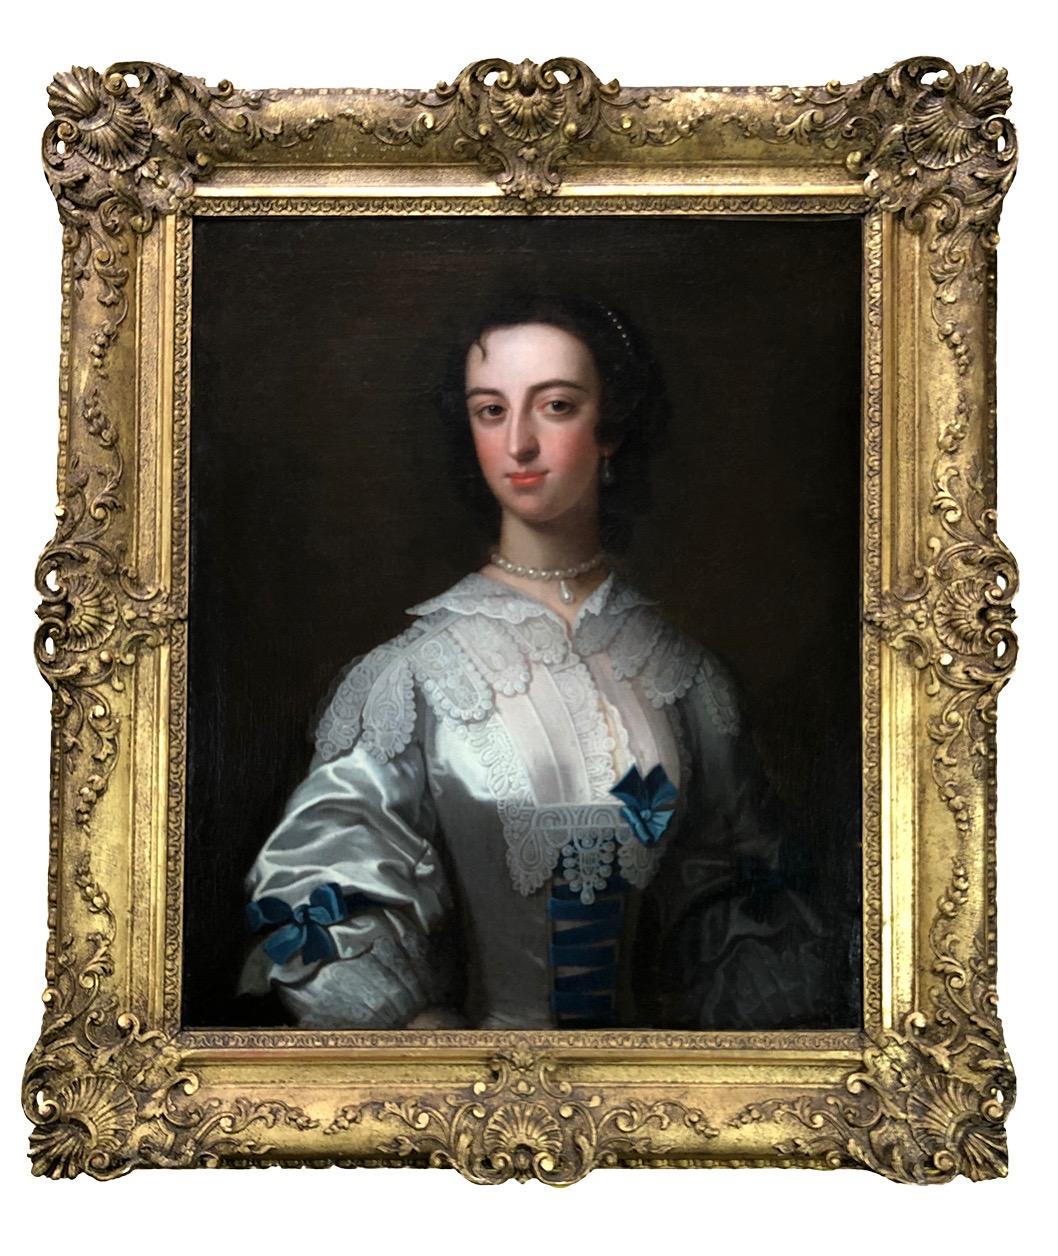 18th Century Portrait of a Lady in an Elaborate Blue and White Costume. - Painting by Enoch Seeman